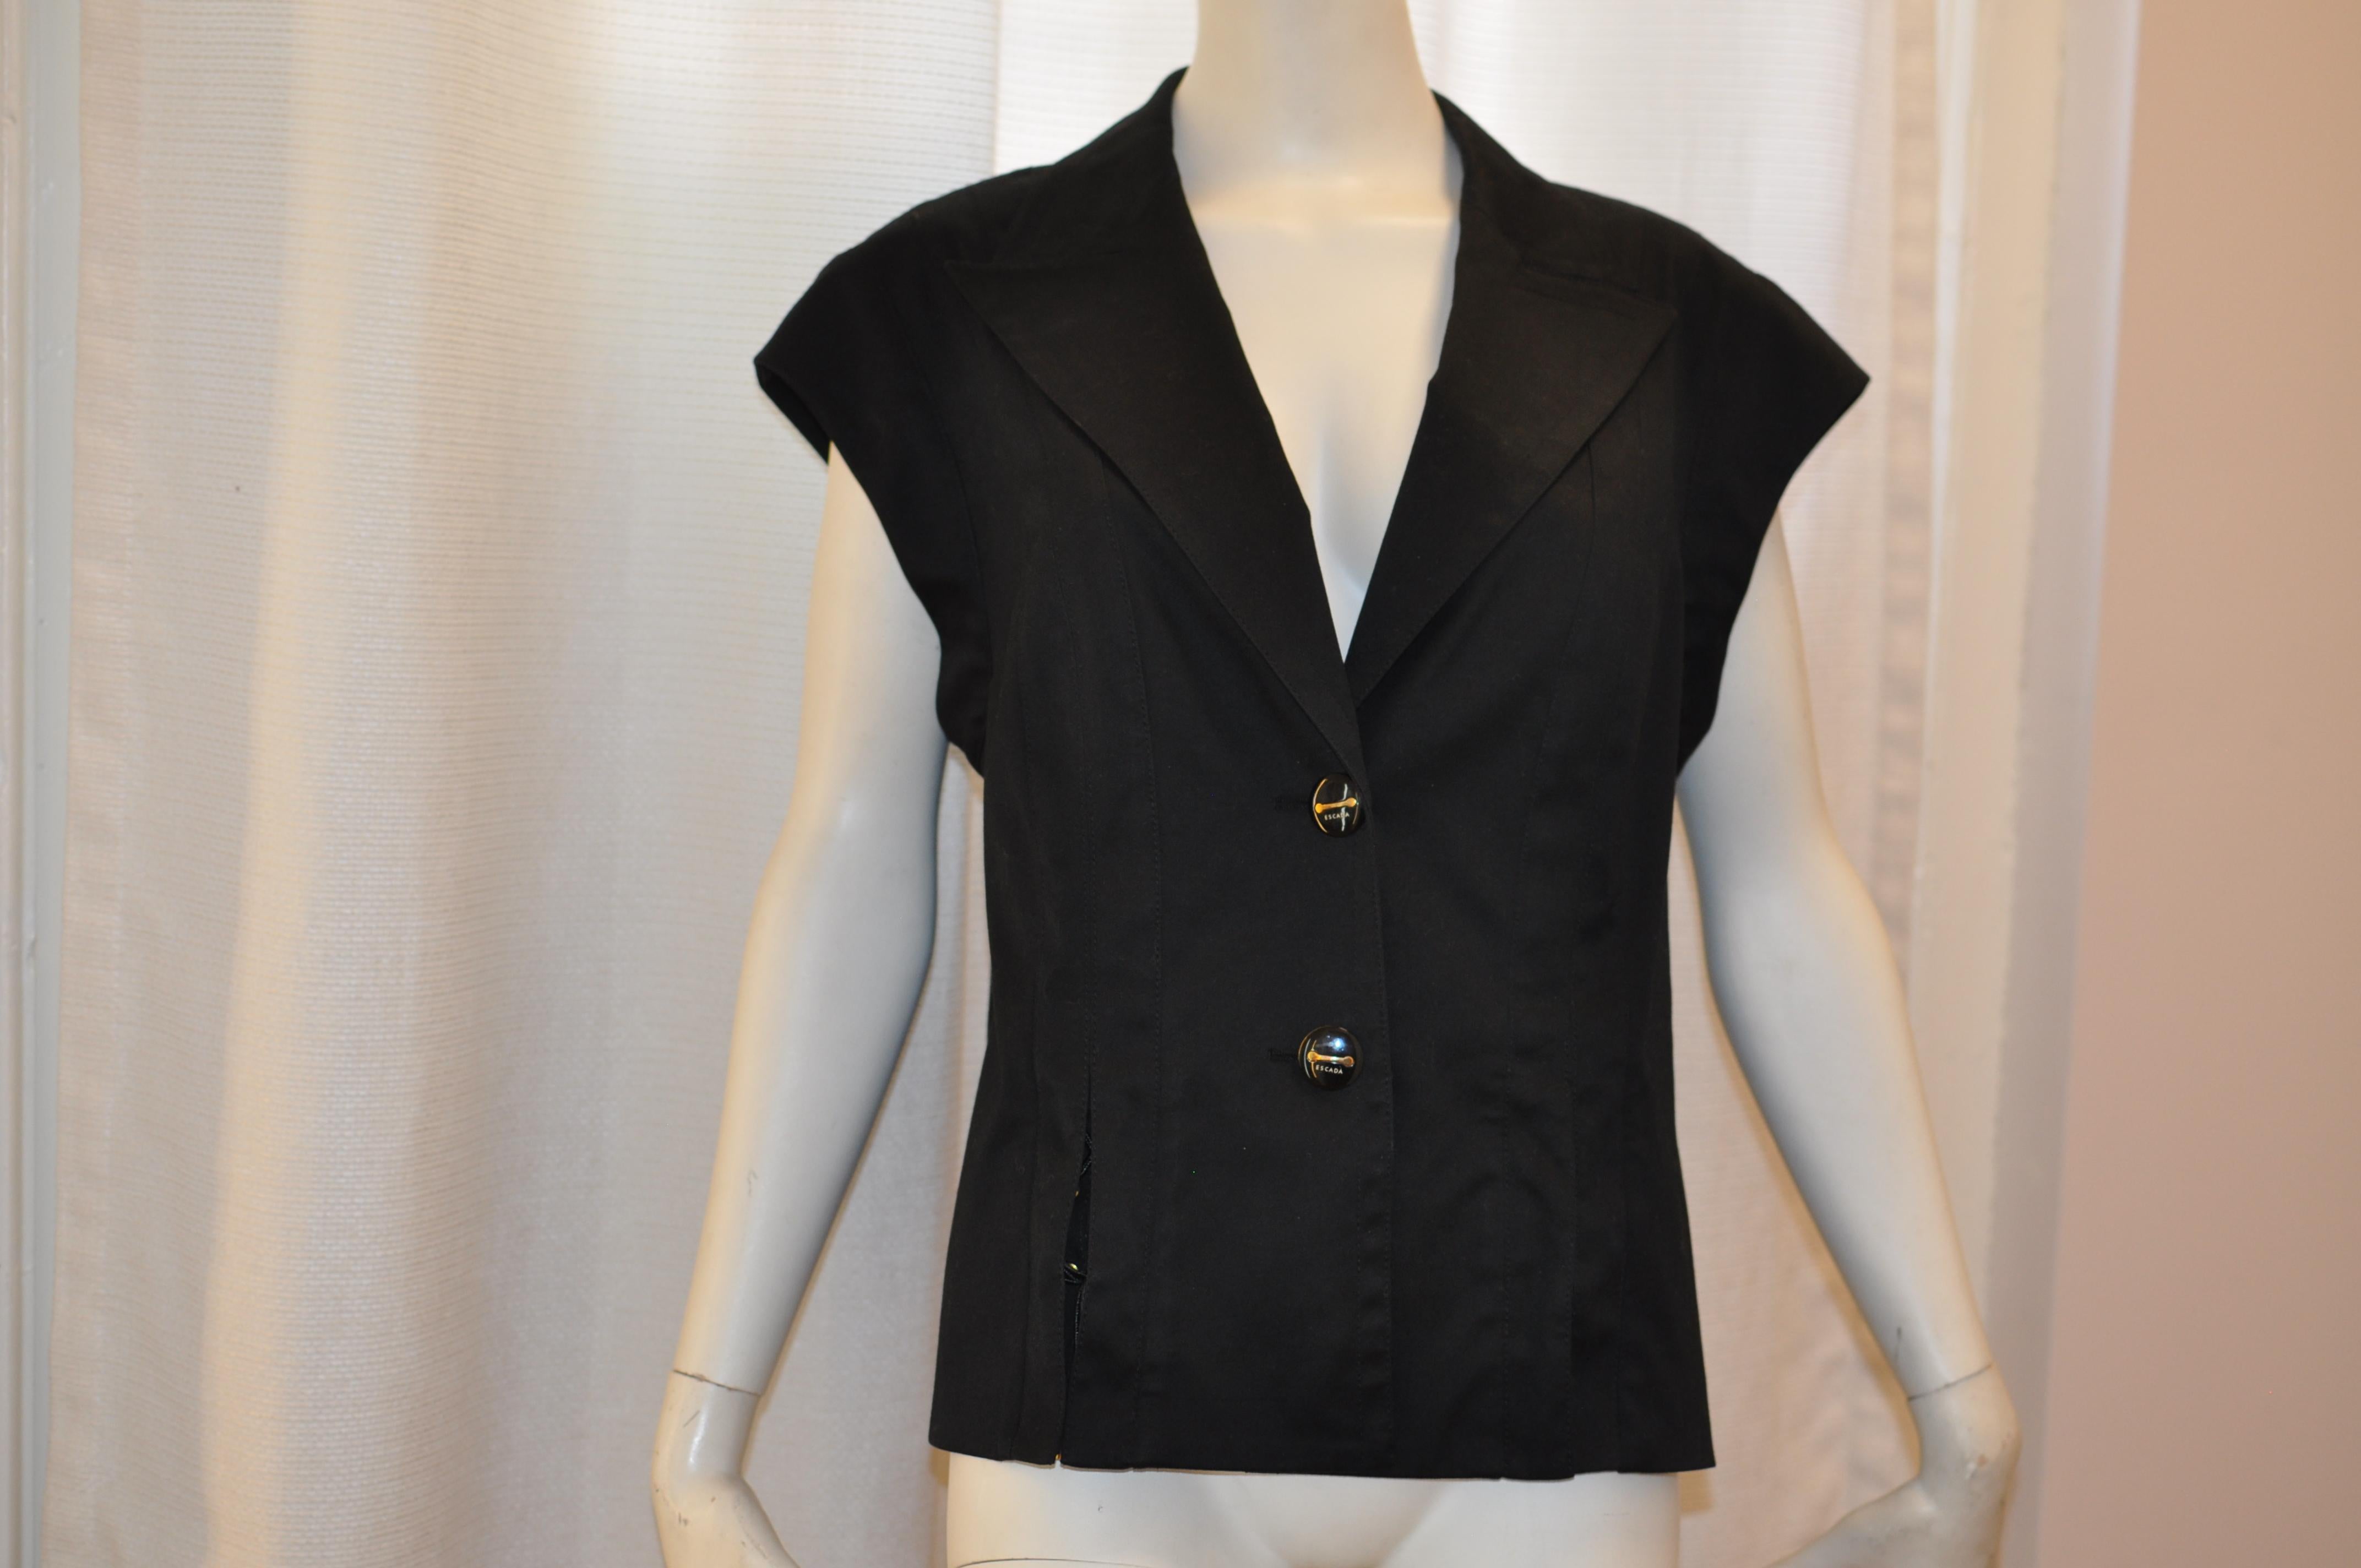 Cap sleeves; two lovely front buttons; notched lapels, and two slits at the front with lace-up details (leather). Can be worn as is or over a sweater or blouse.

The lining is a black and white animal print.